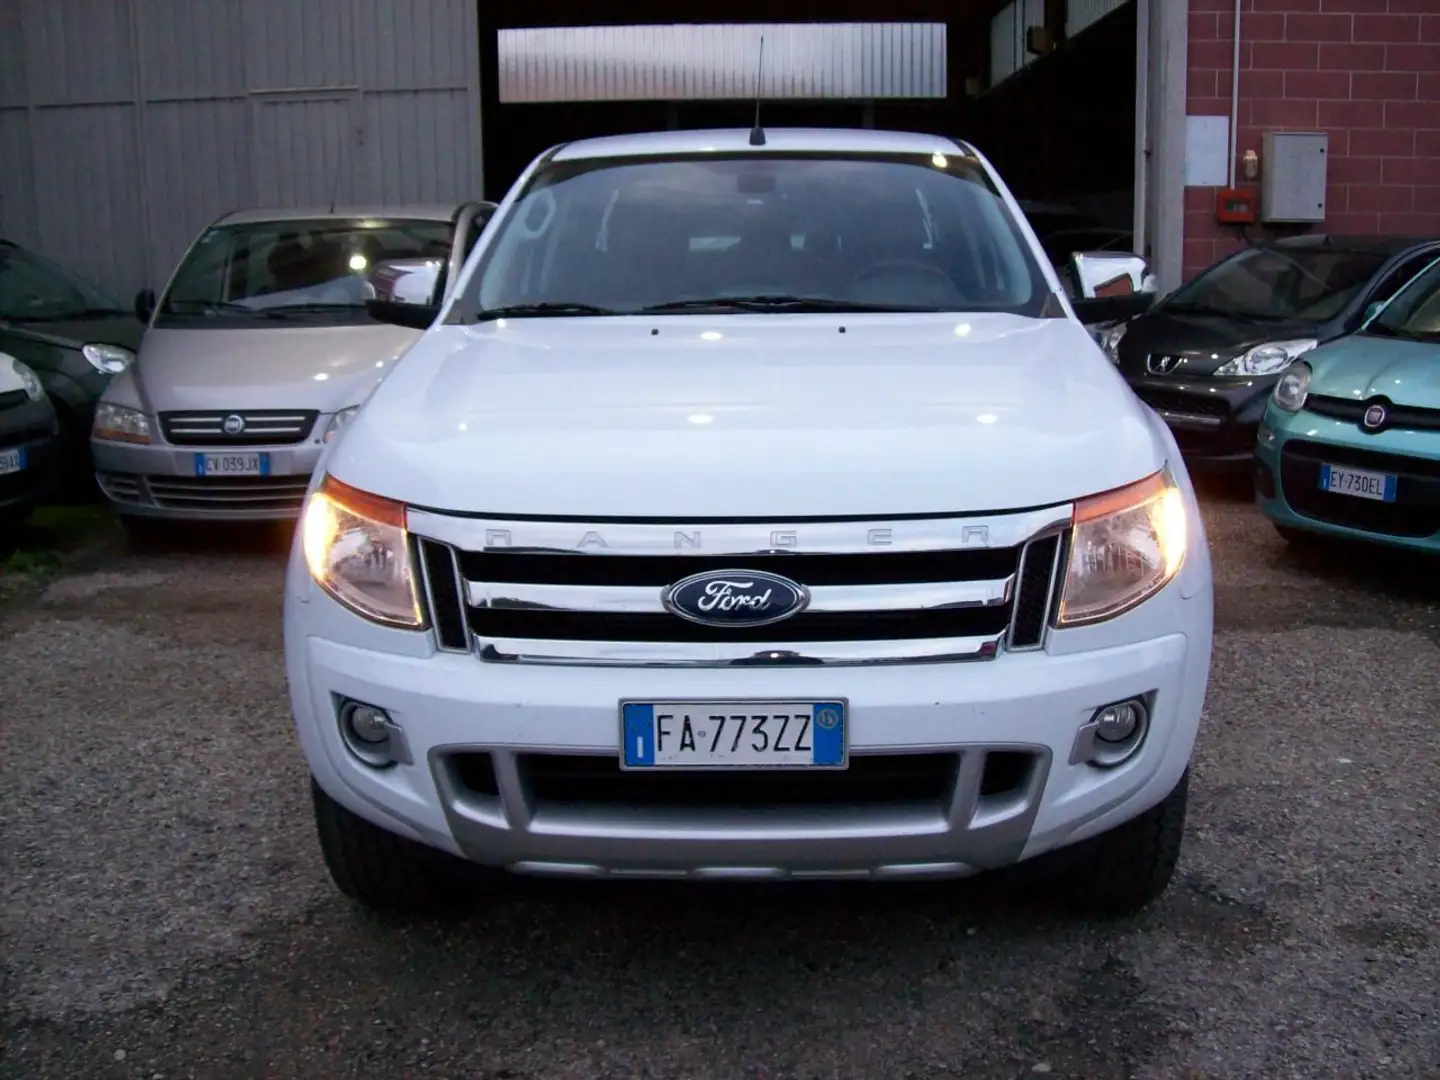 Ford Ranger Ranger 2.2 tdci double cab Limited auto Bianco - 1